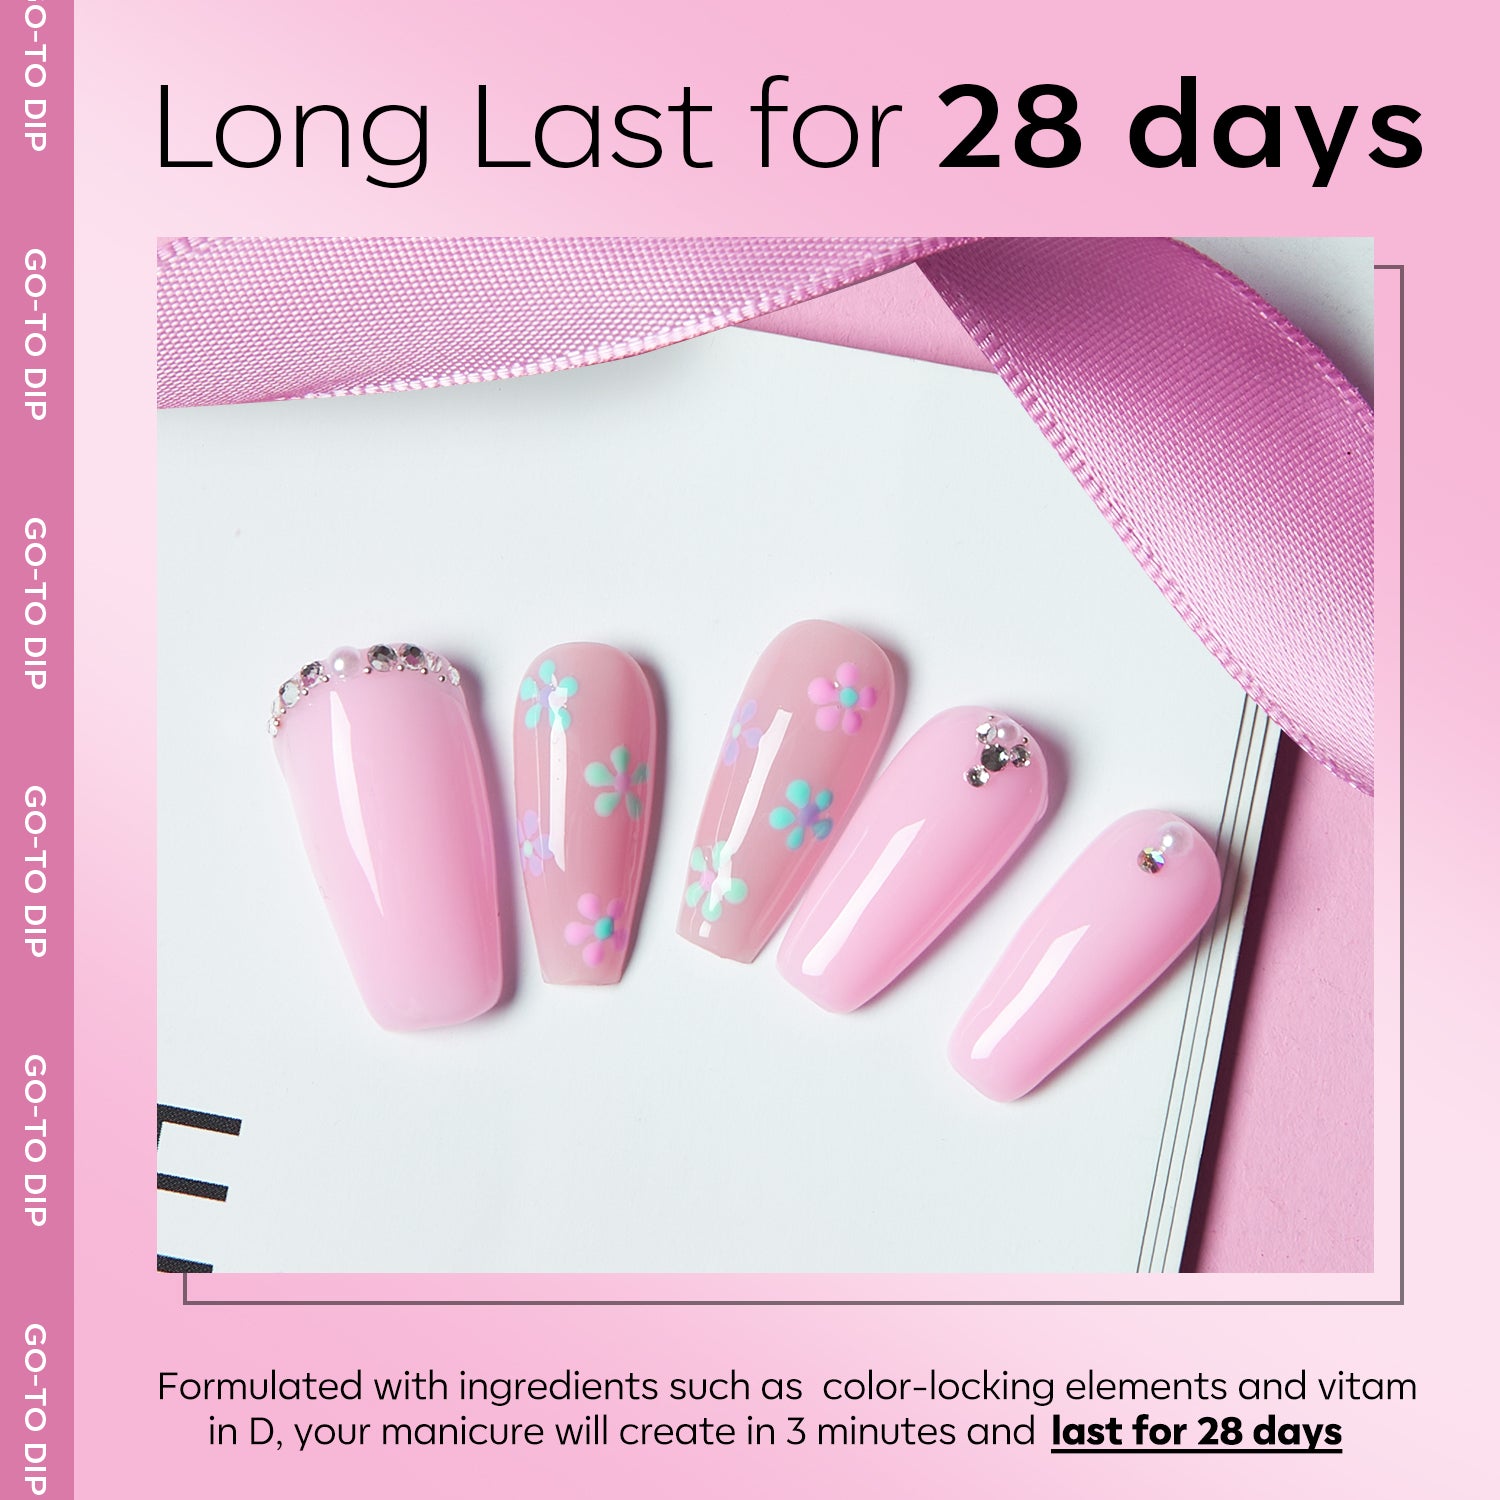 7 For $30 Sale Poly Nail Gel (15g)